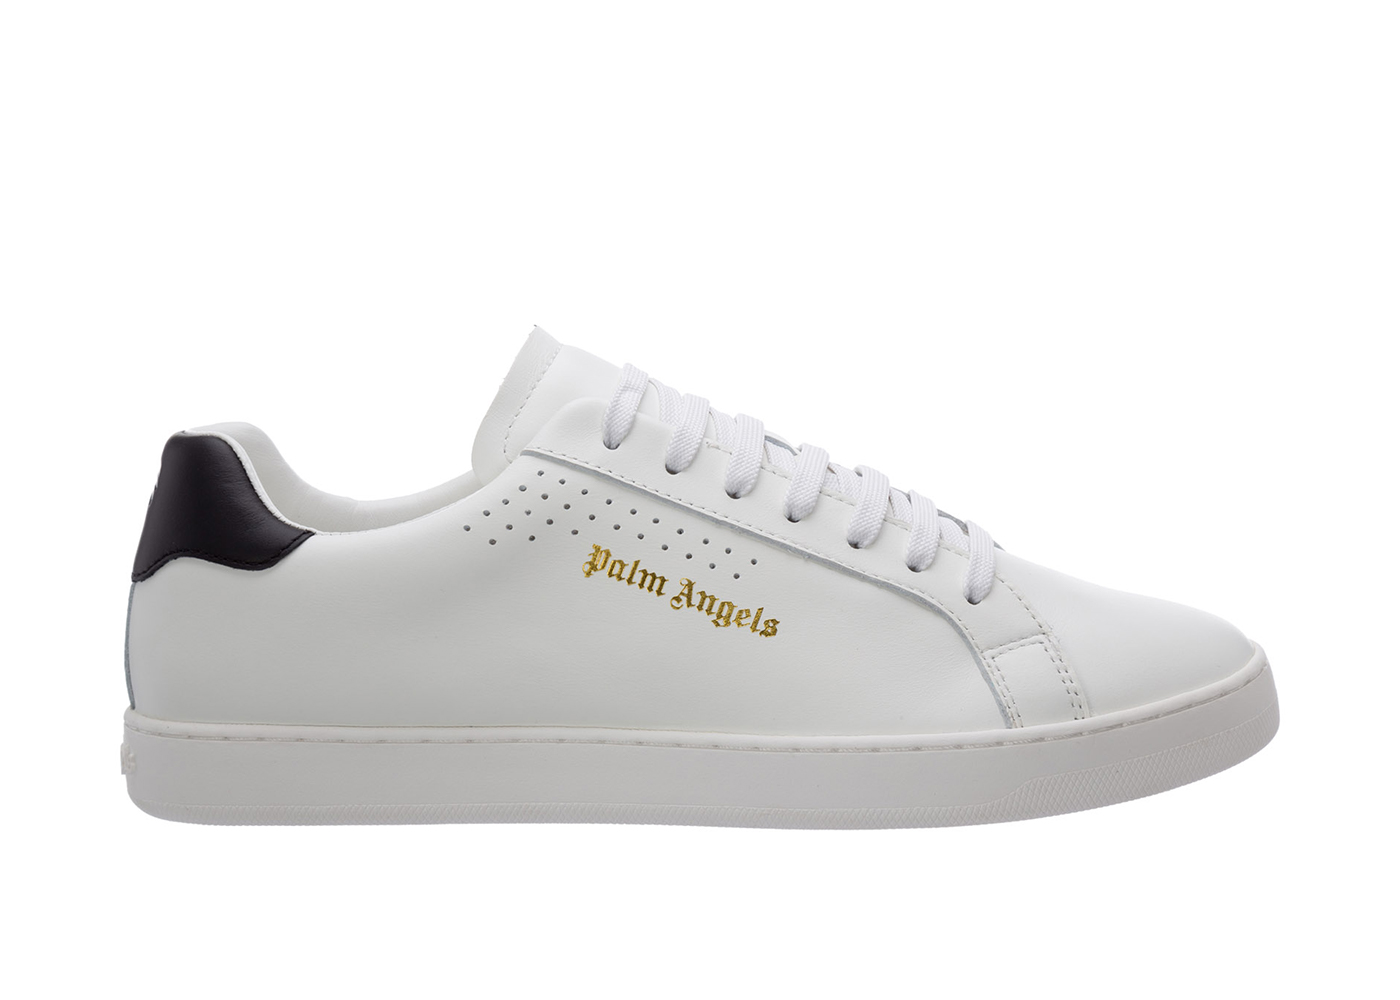 Buy Palm Angels Shoes & New Sneakers - StockX